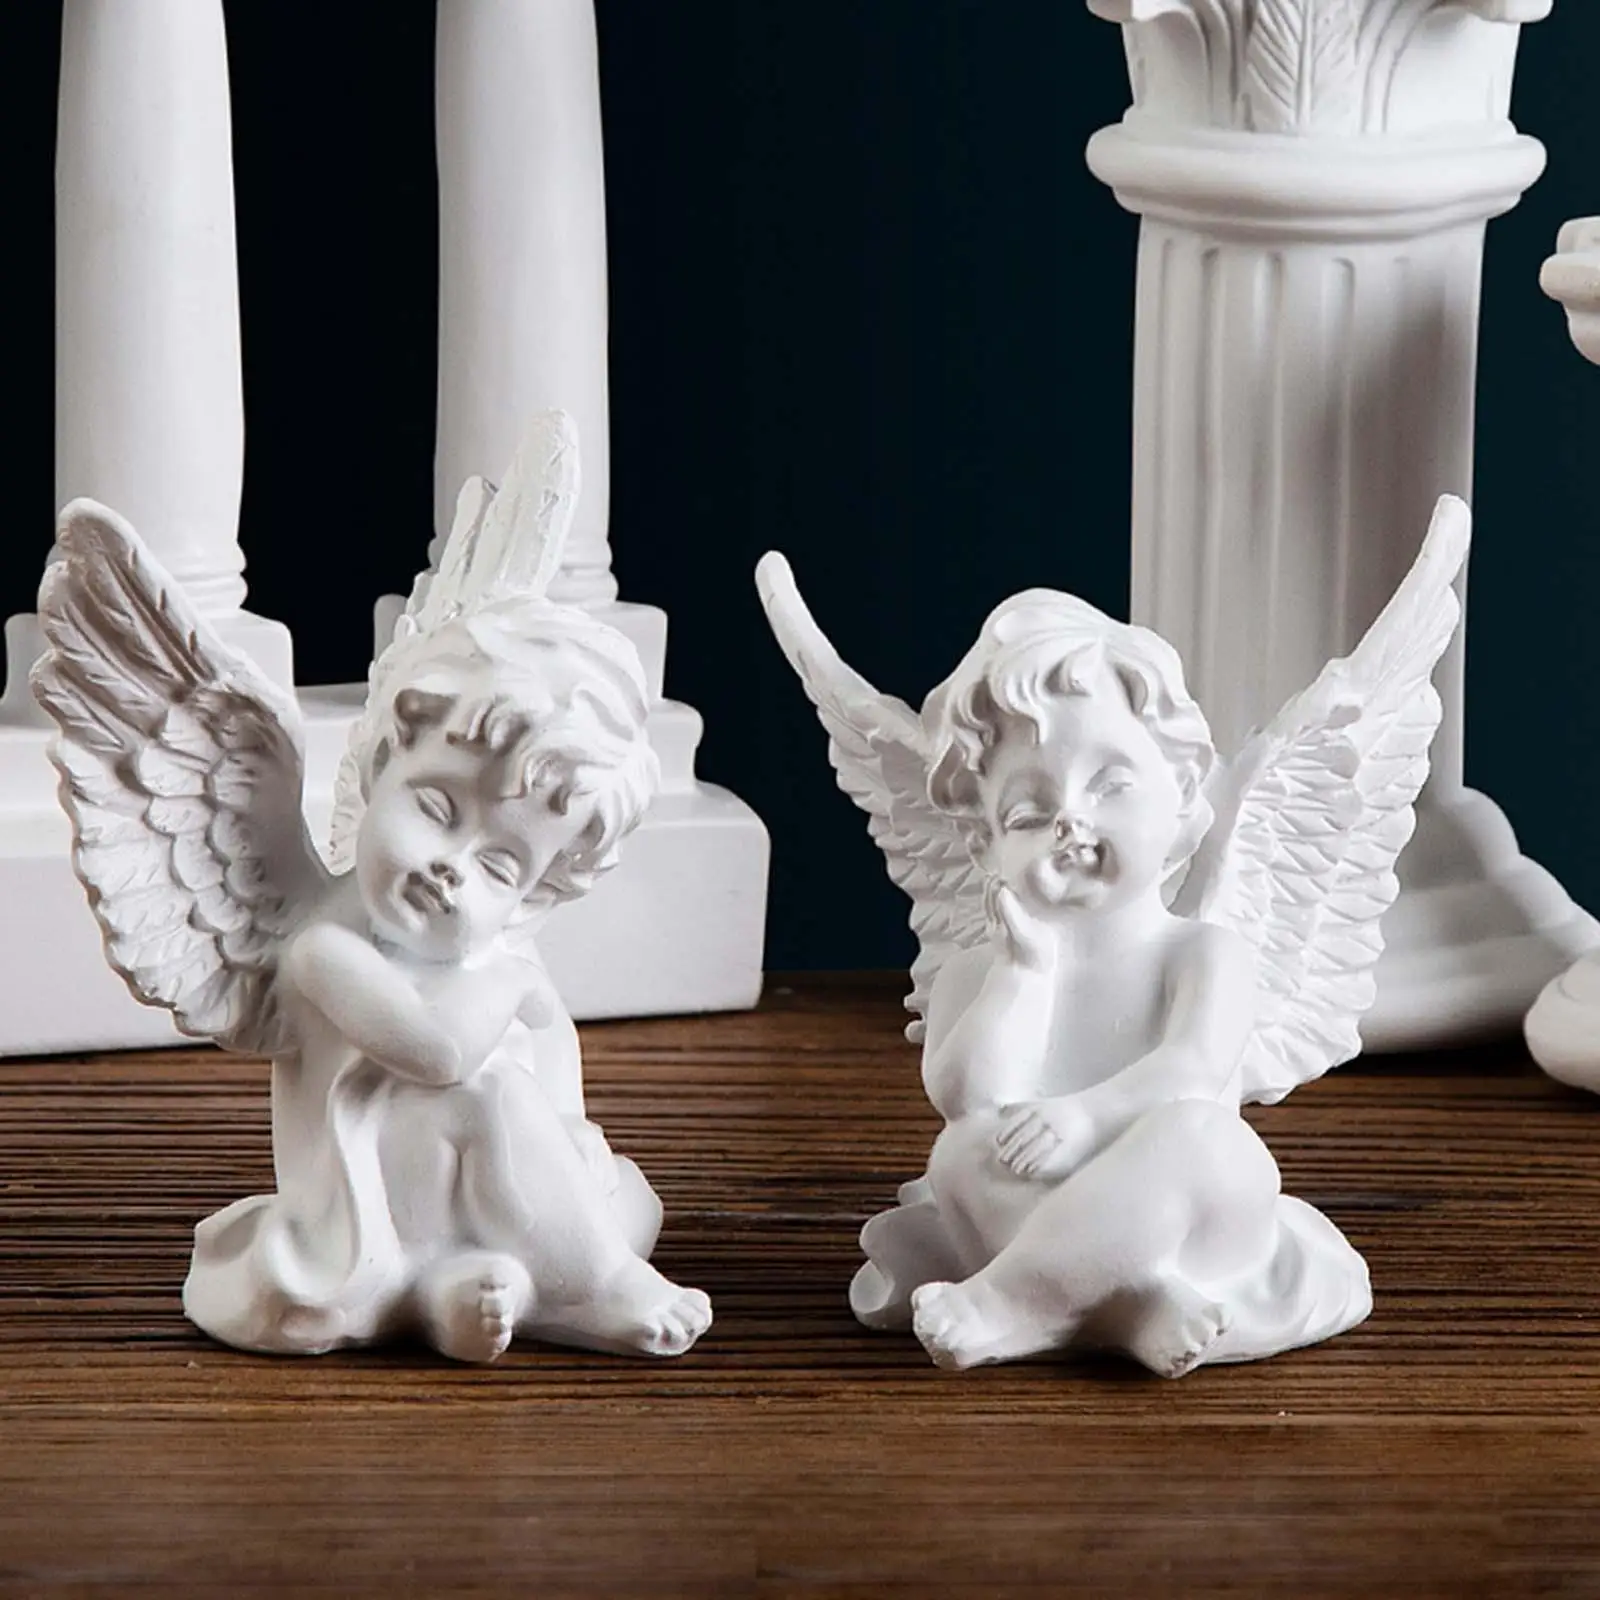 2 Pieces Cherubs Angels Statue Resin Birthday Gifts Small Nordic for Desktop